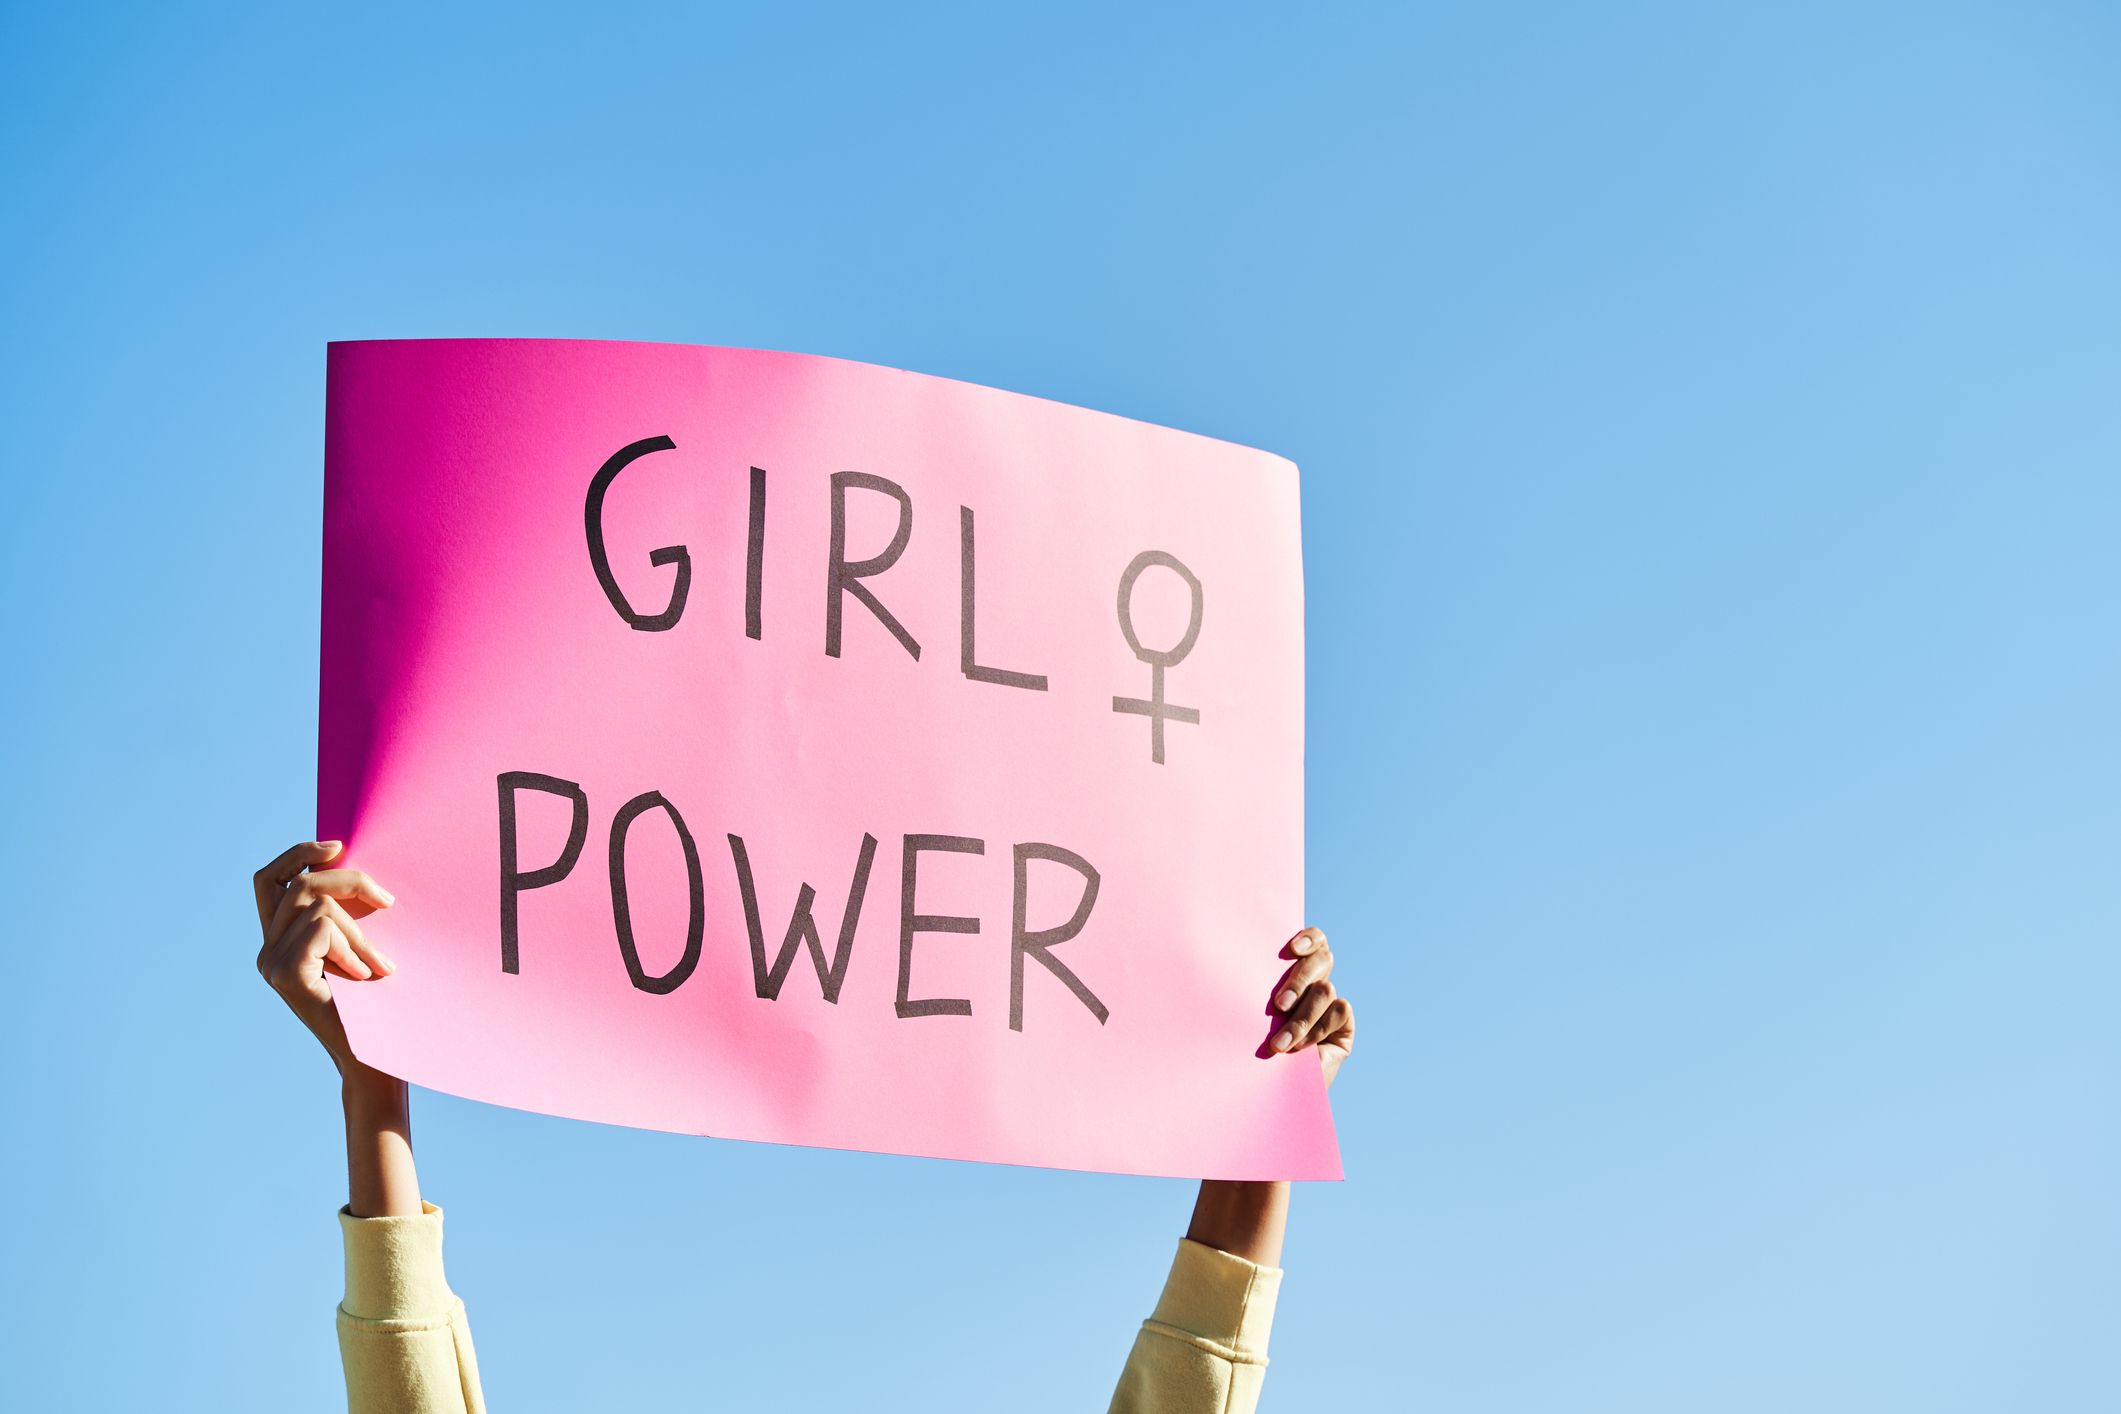 65 International Women's Day Quotes to Share in 2024